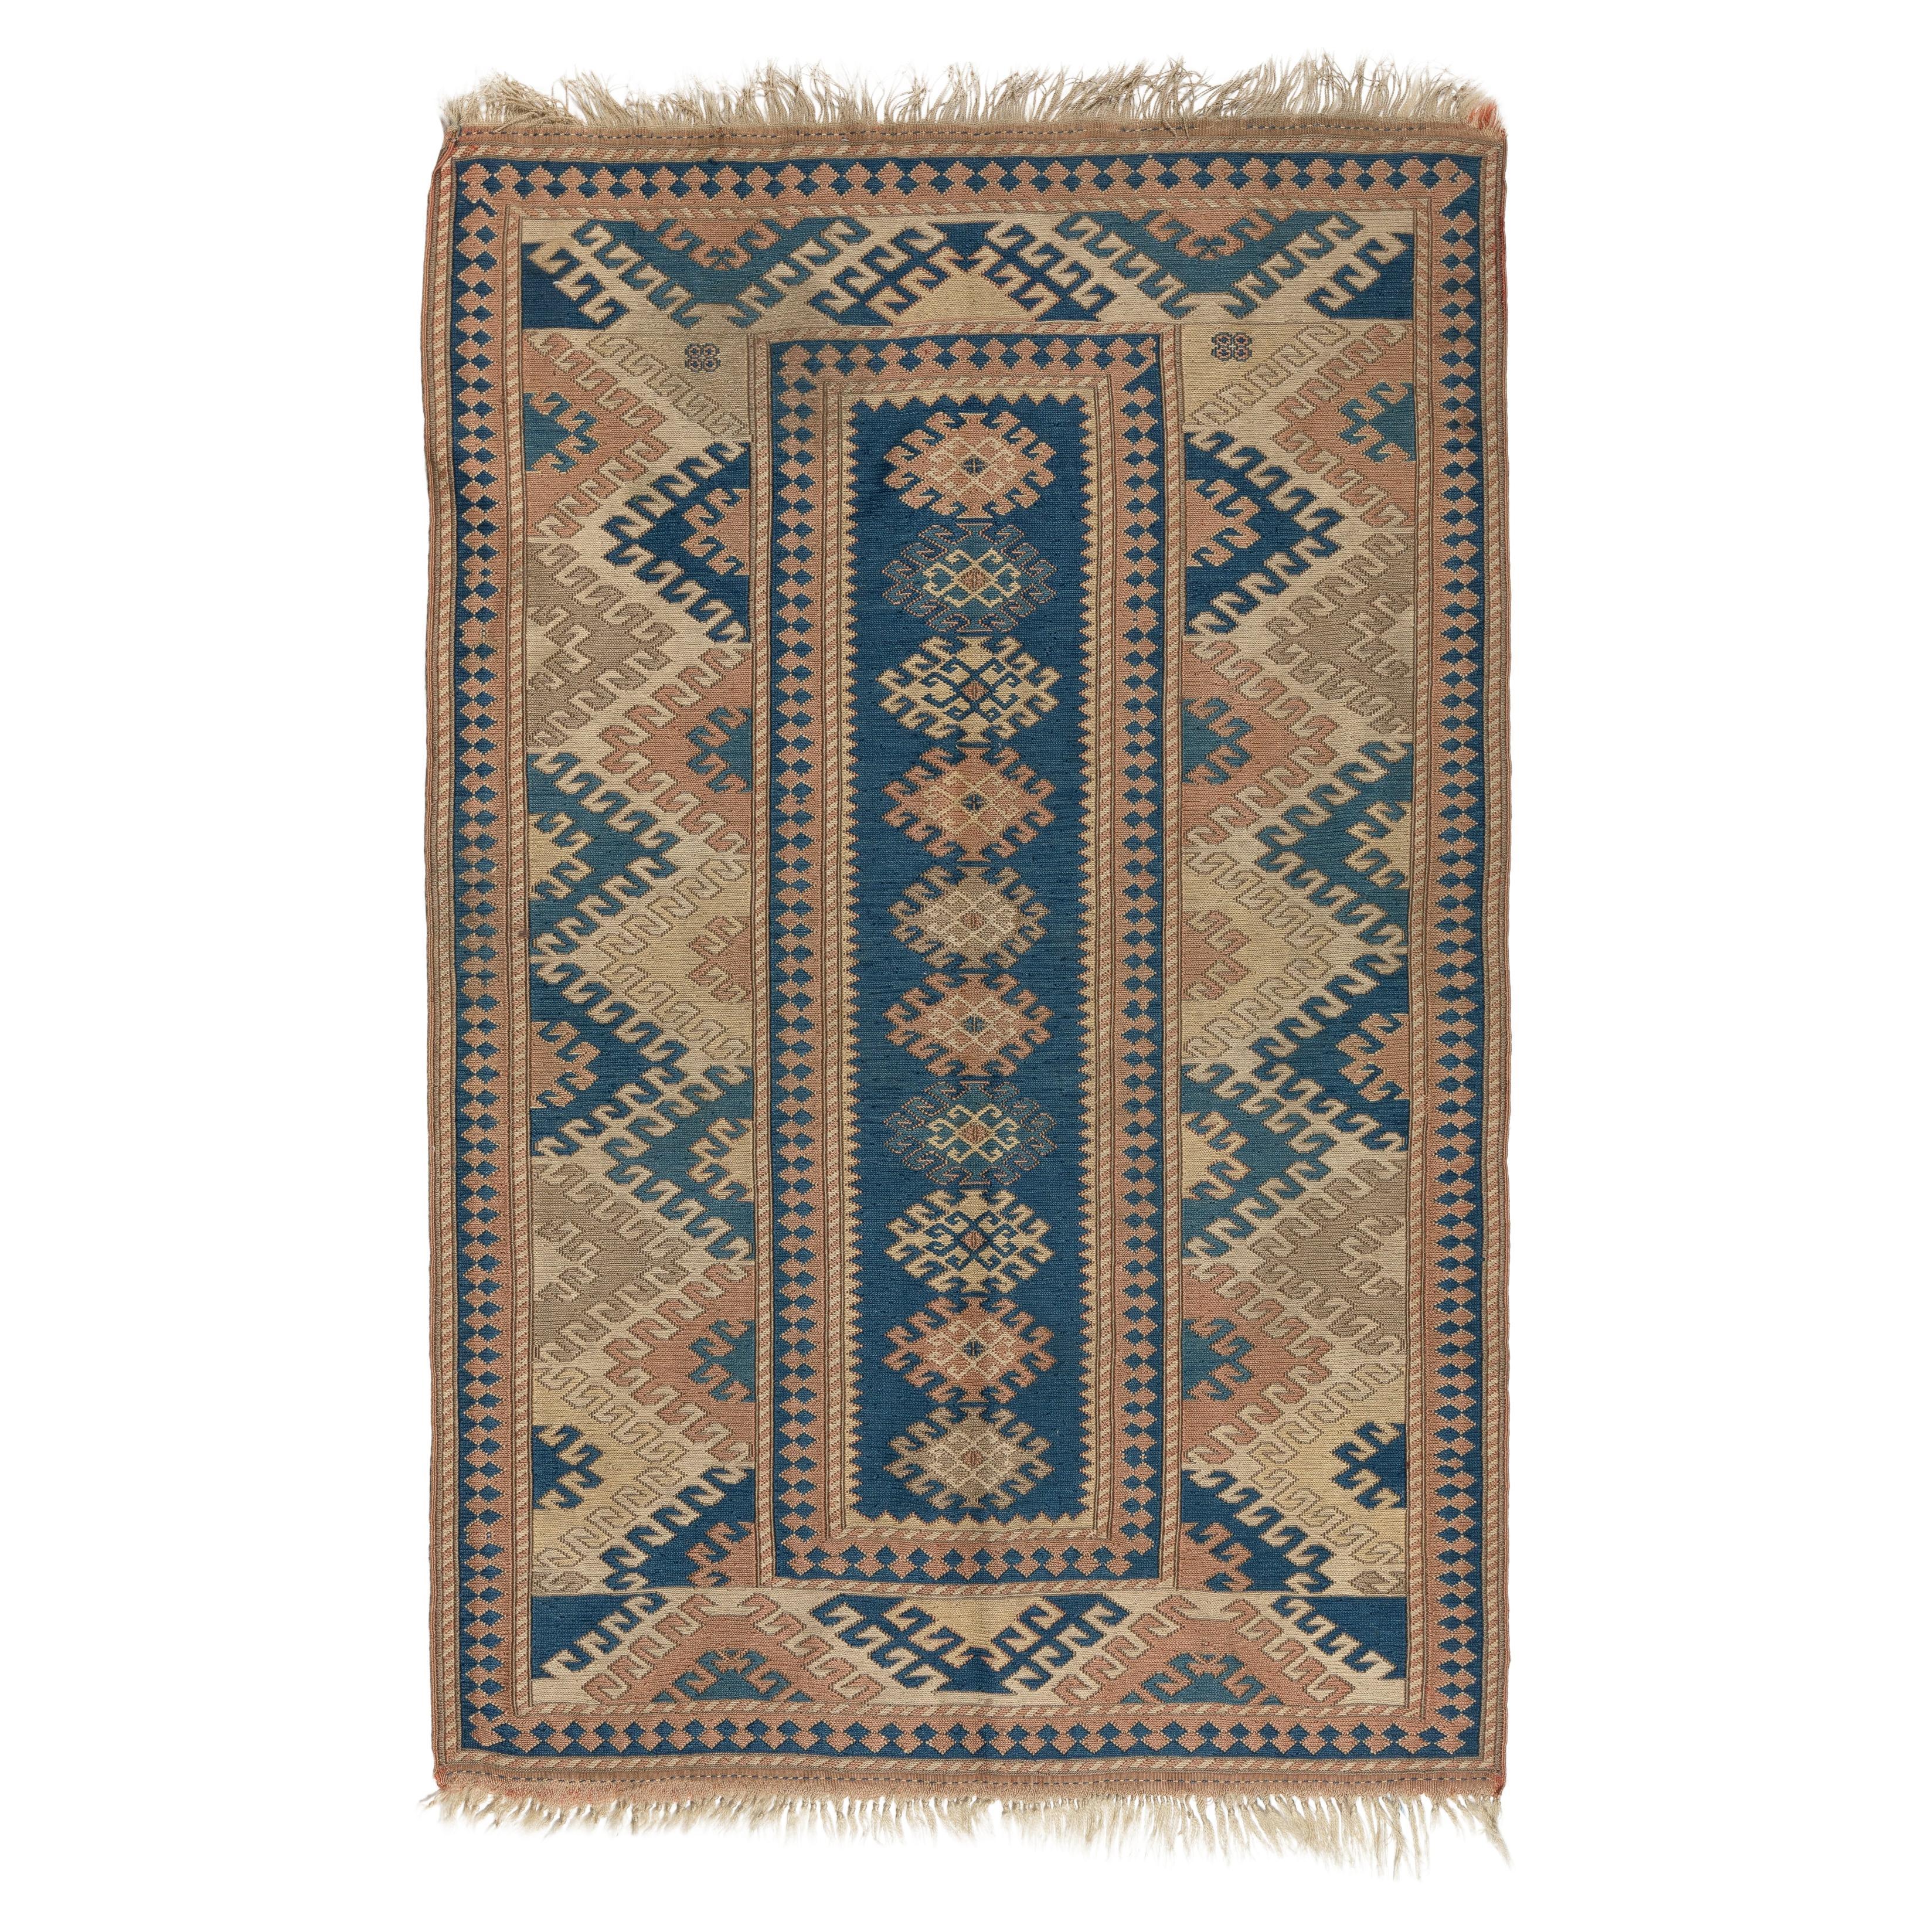 4x5.8 Ft Vintage Soumak Turkish Accent Rug with Wool Pile For Sale